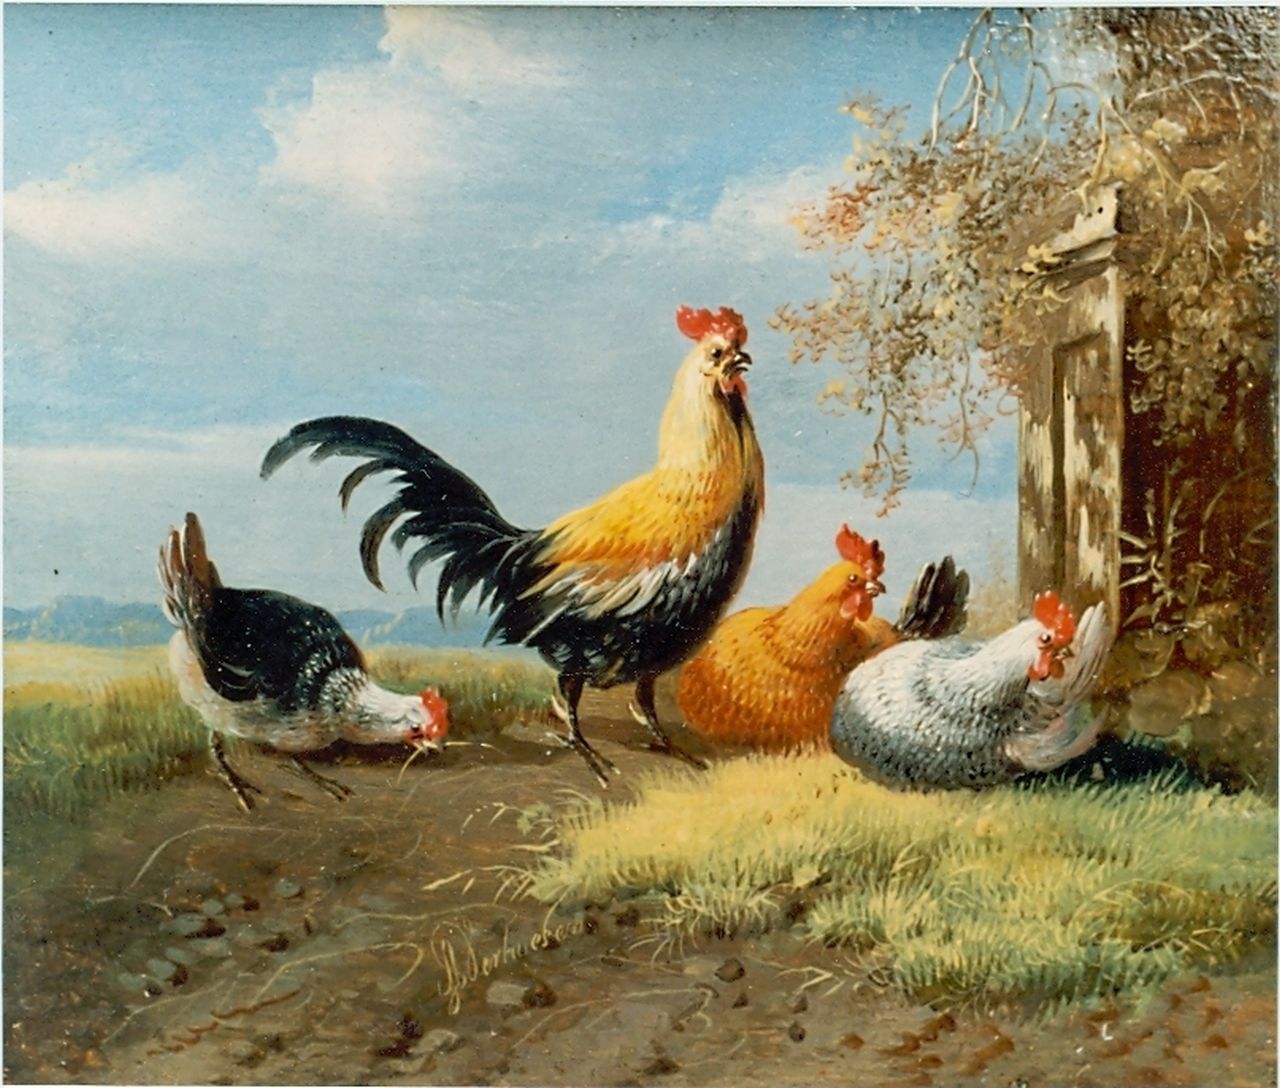 Verhoesen A.  | Albertus Verhoesen, A rooster and chickens, Öl auf Holz 11,3 x 13,2 cm, signed l.l.